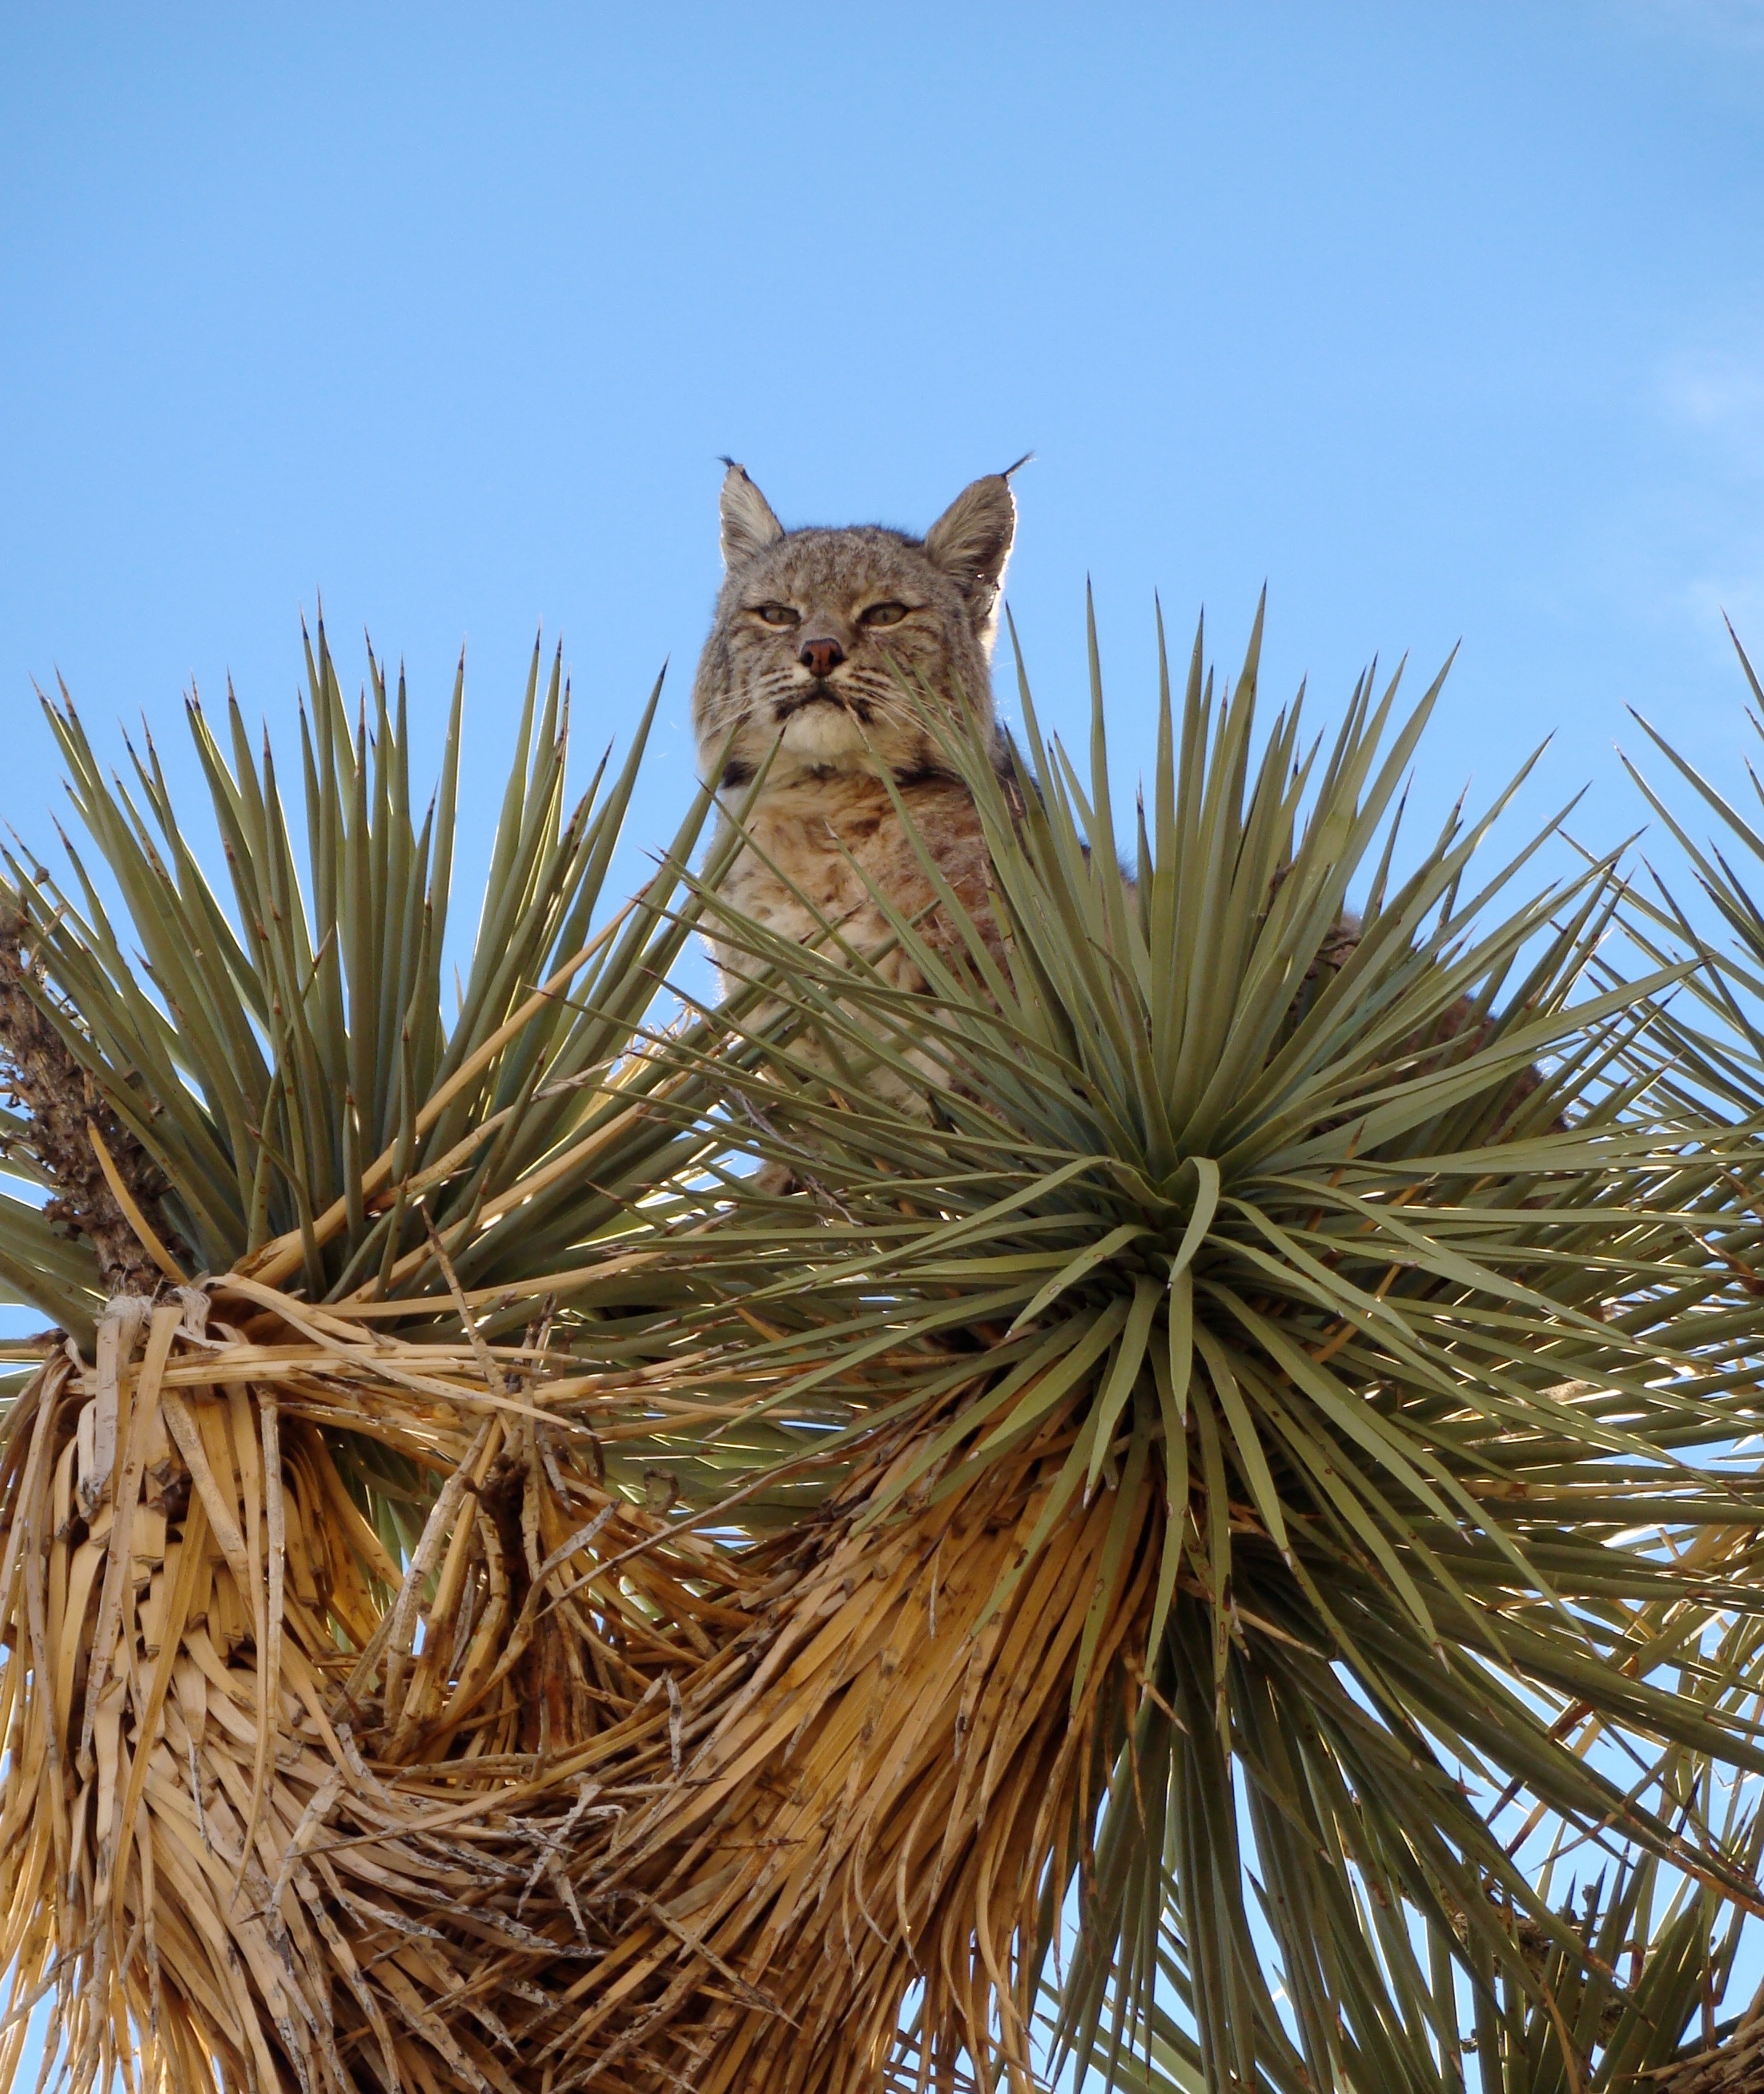 Where have all the bobcats gone? – For The Curious